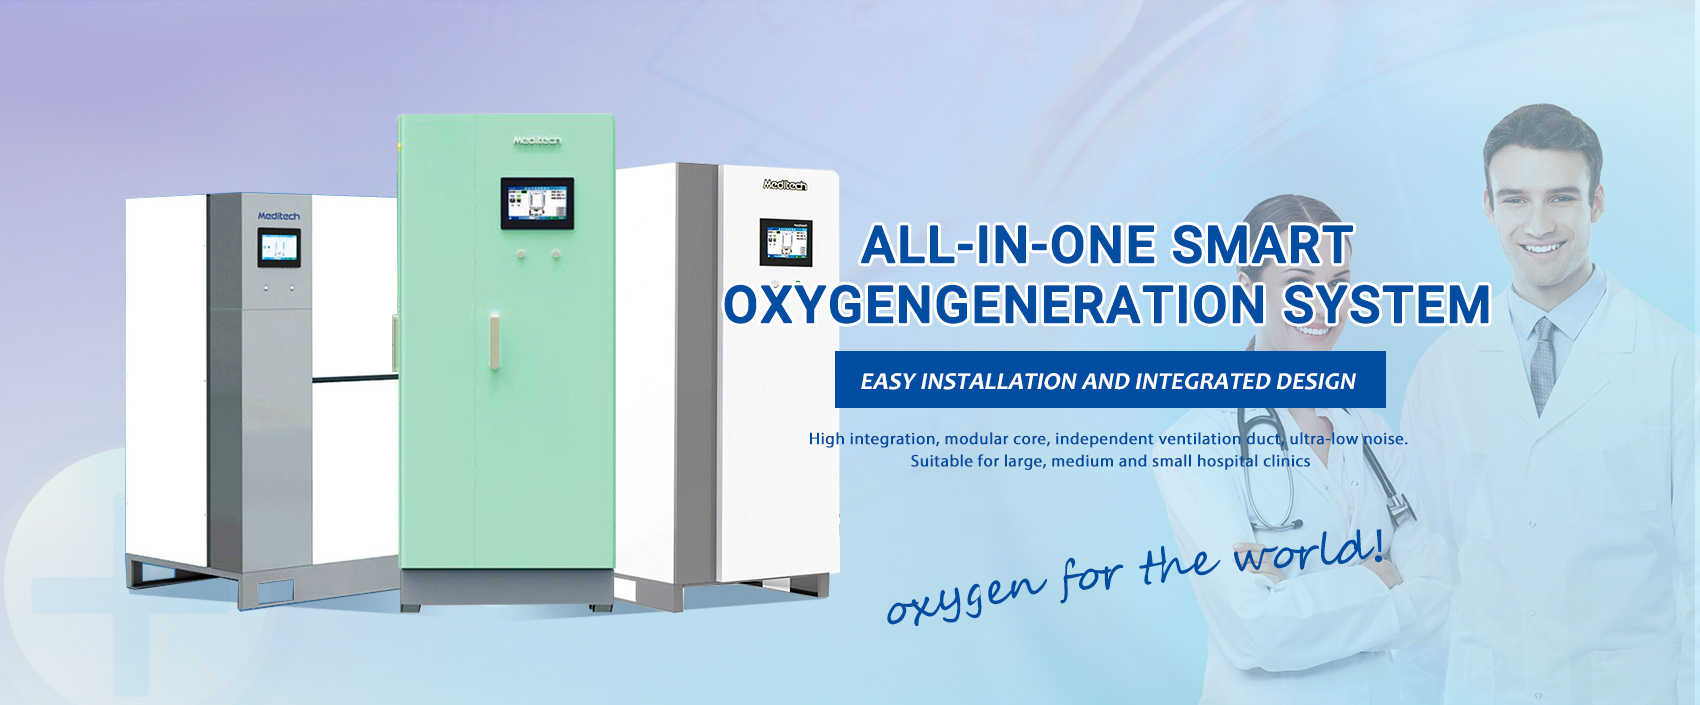 All-in-one Medical Oxygen Systems